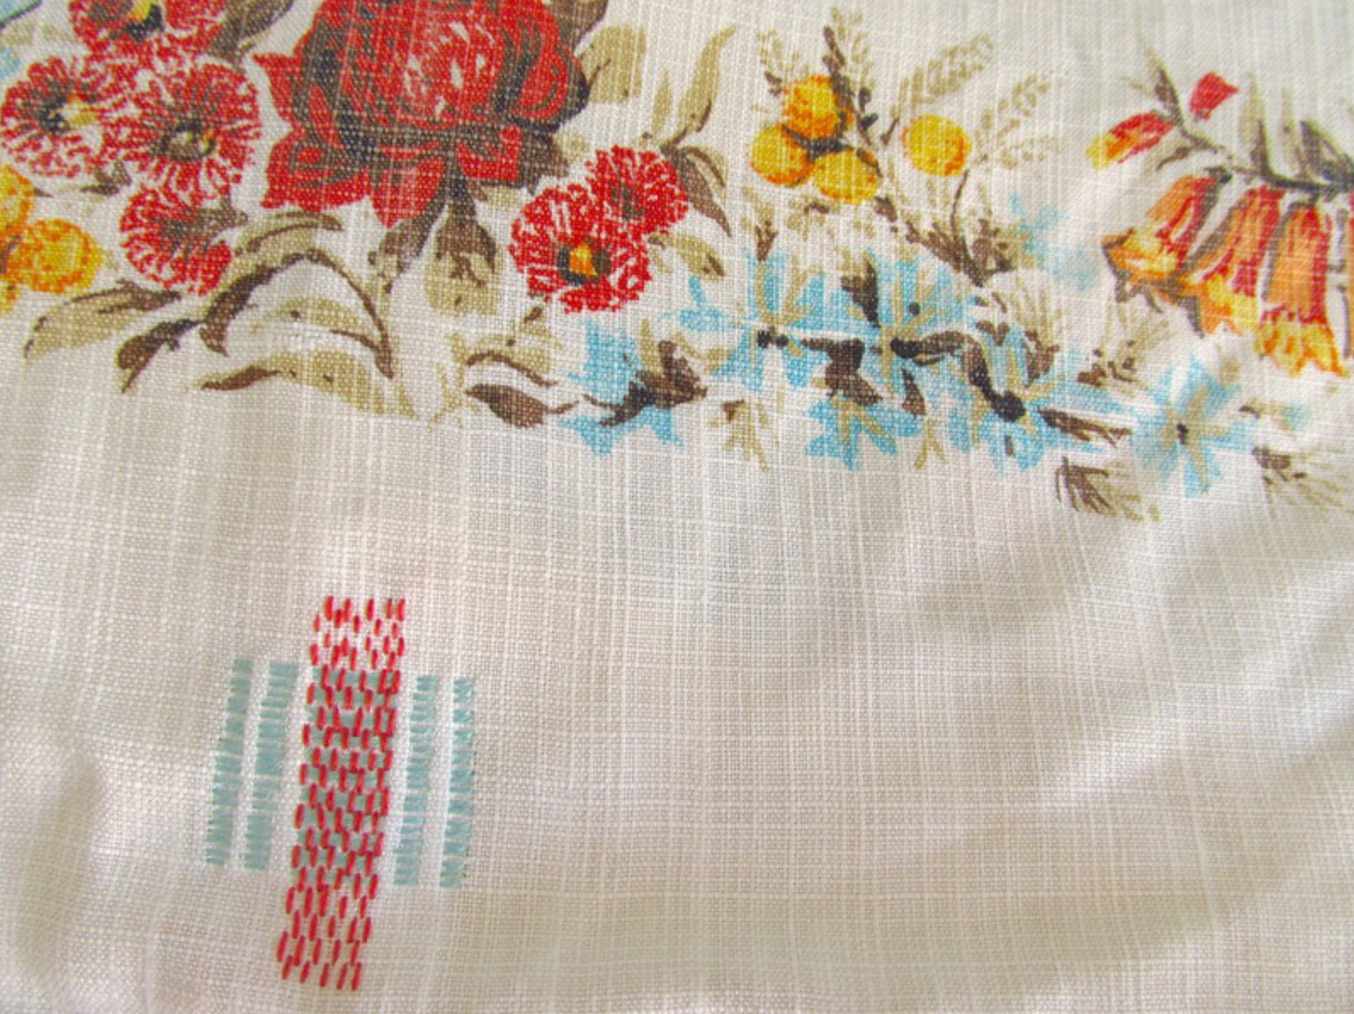 Repairing textiles with stitching